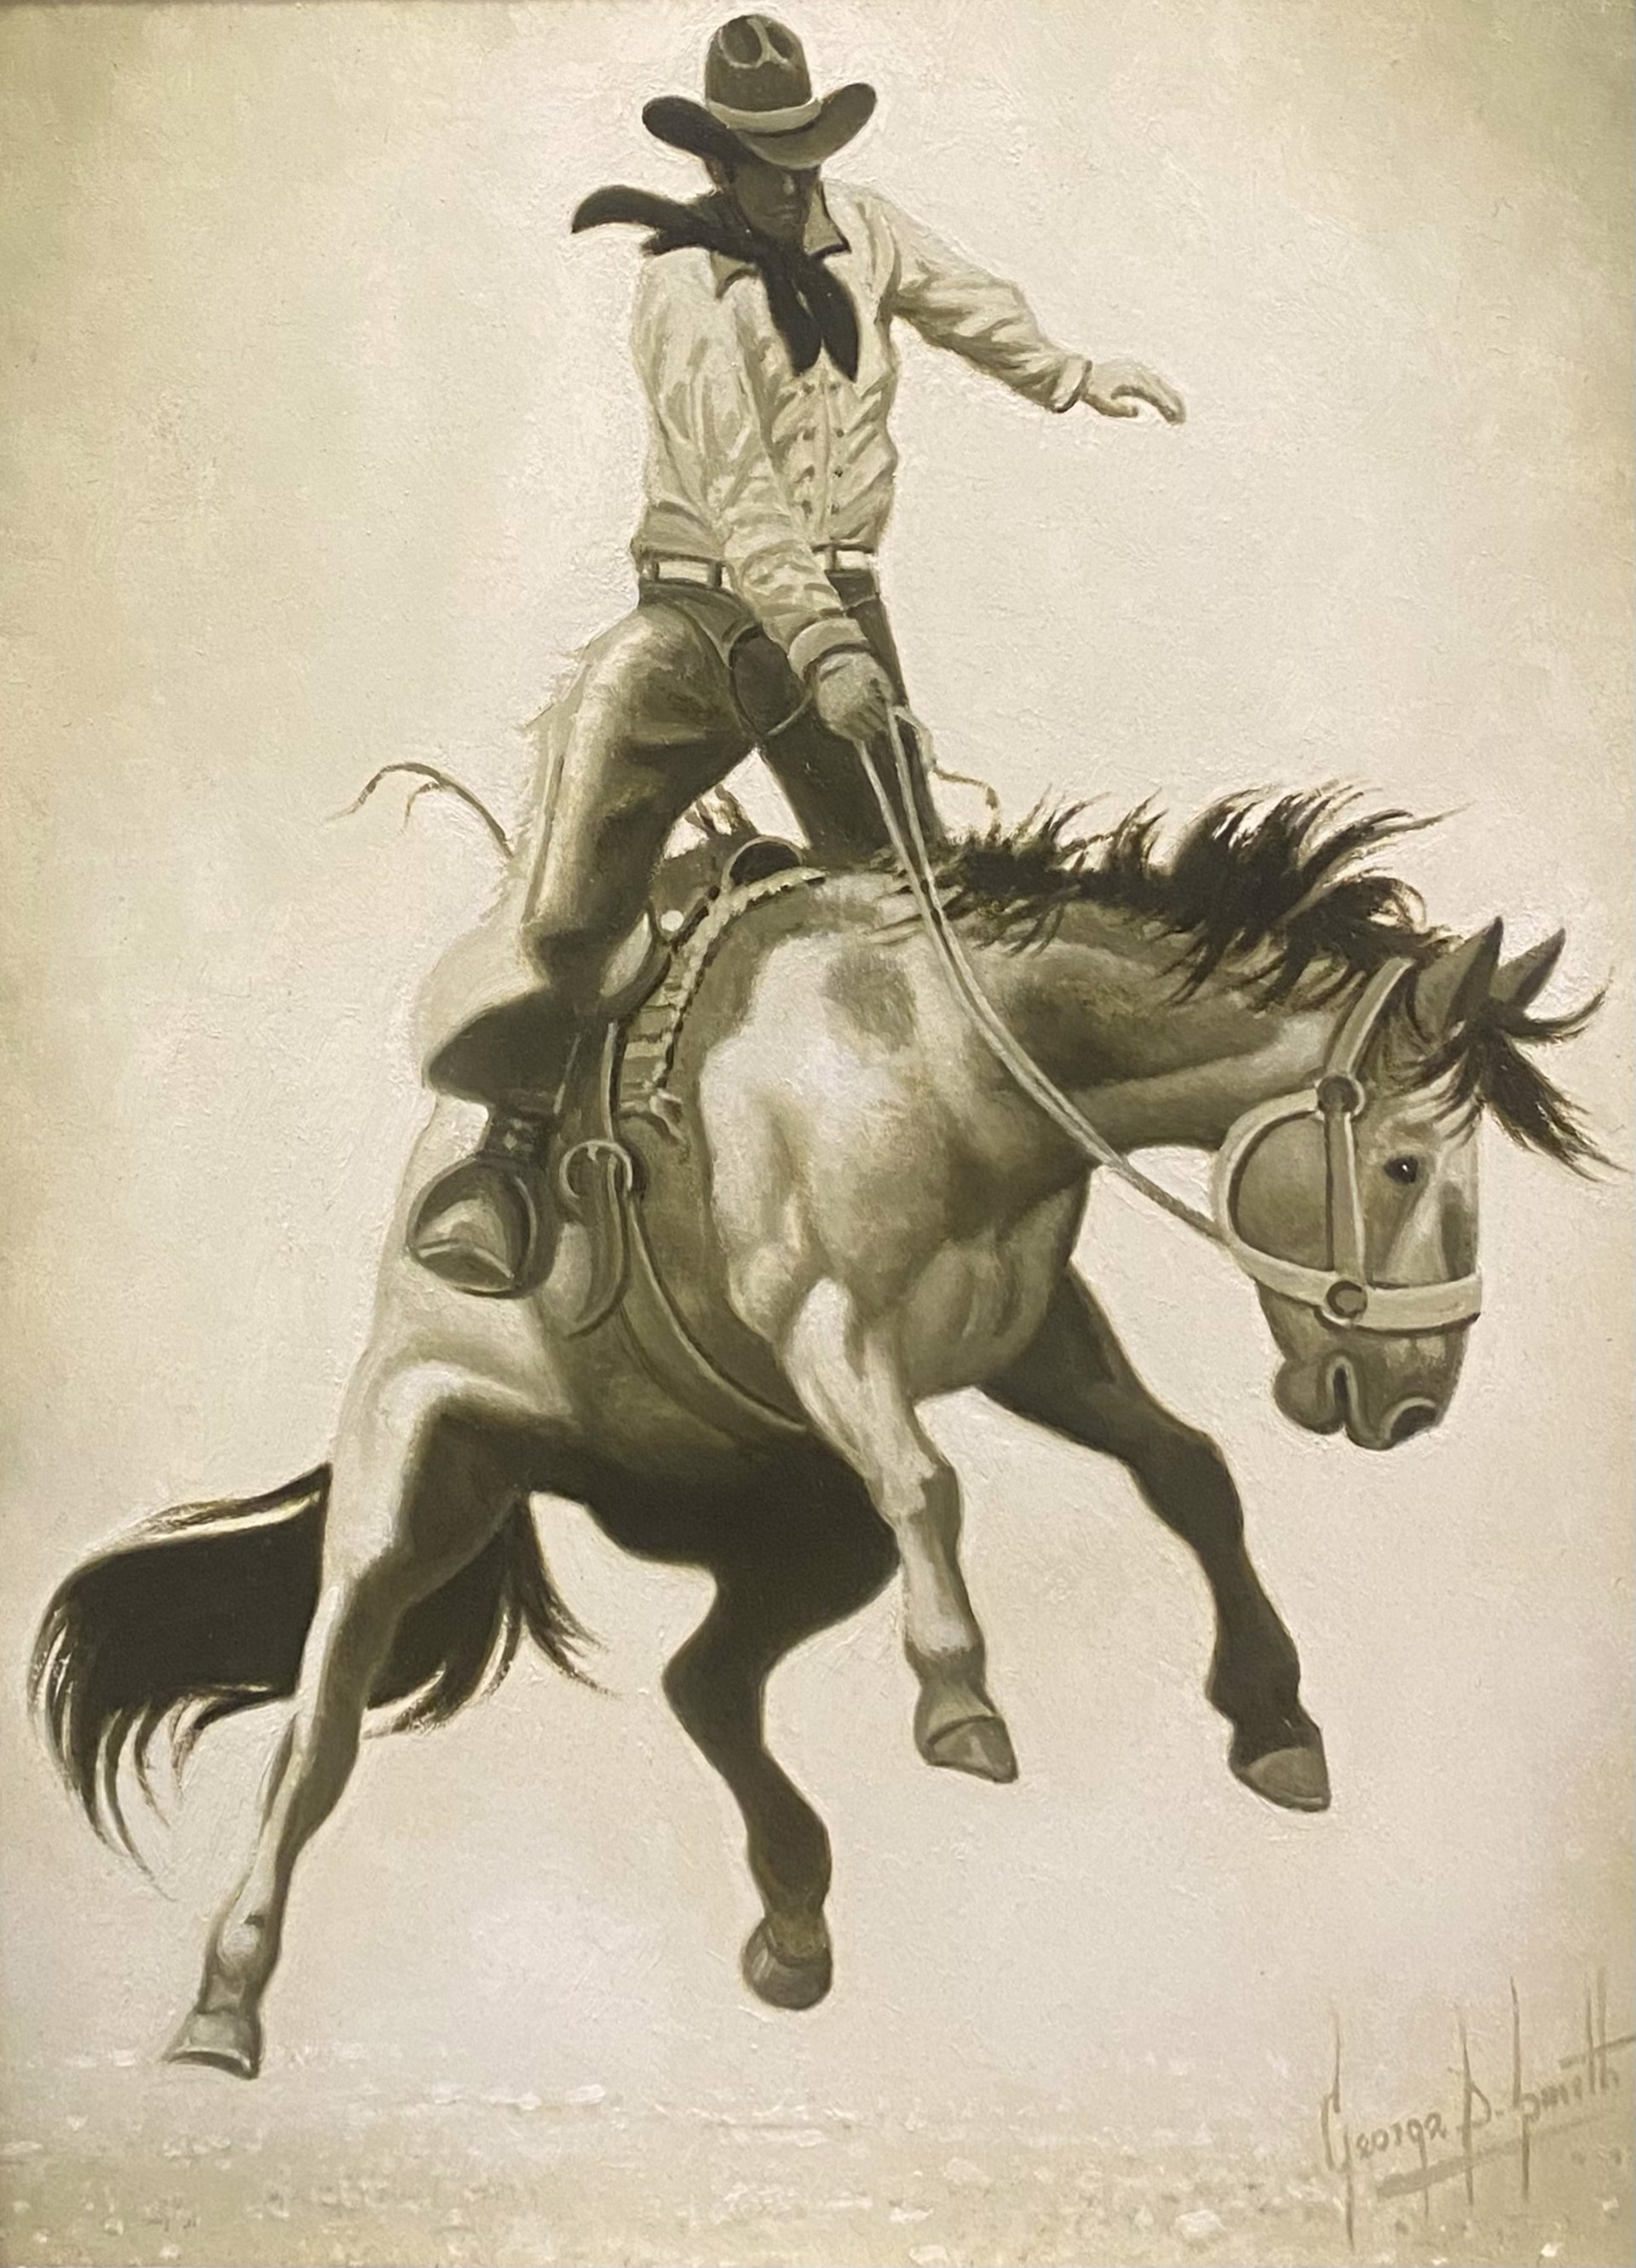 OLD TIME BRONC RIDER II by George "Dee" Smith